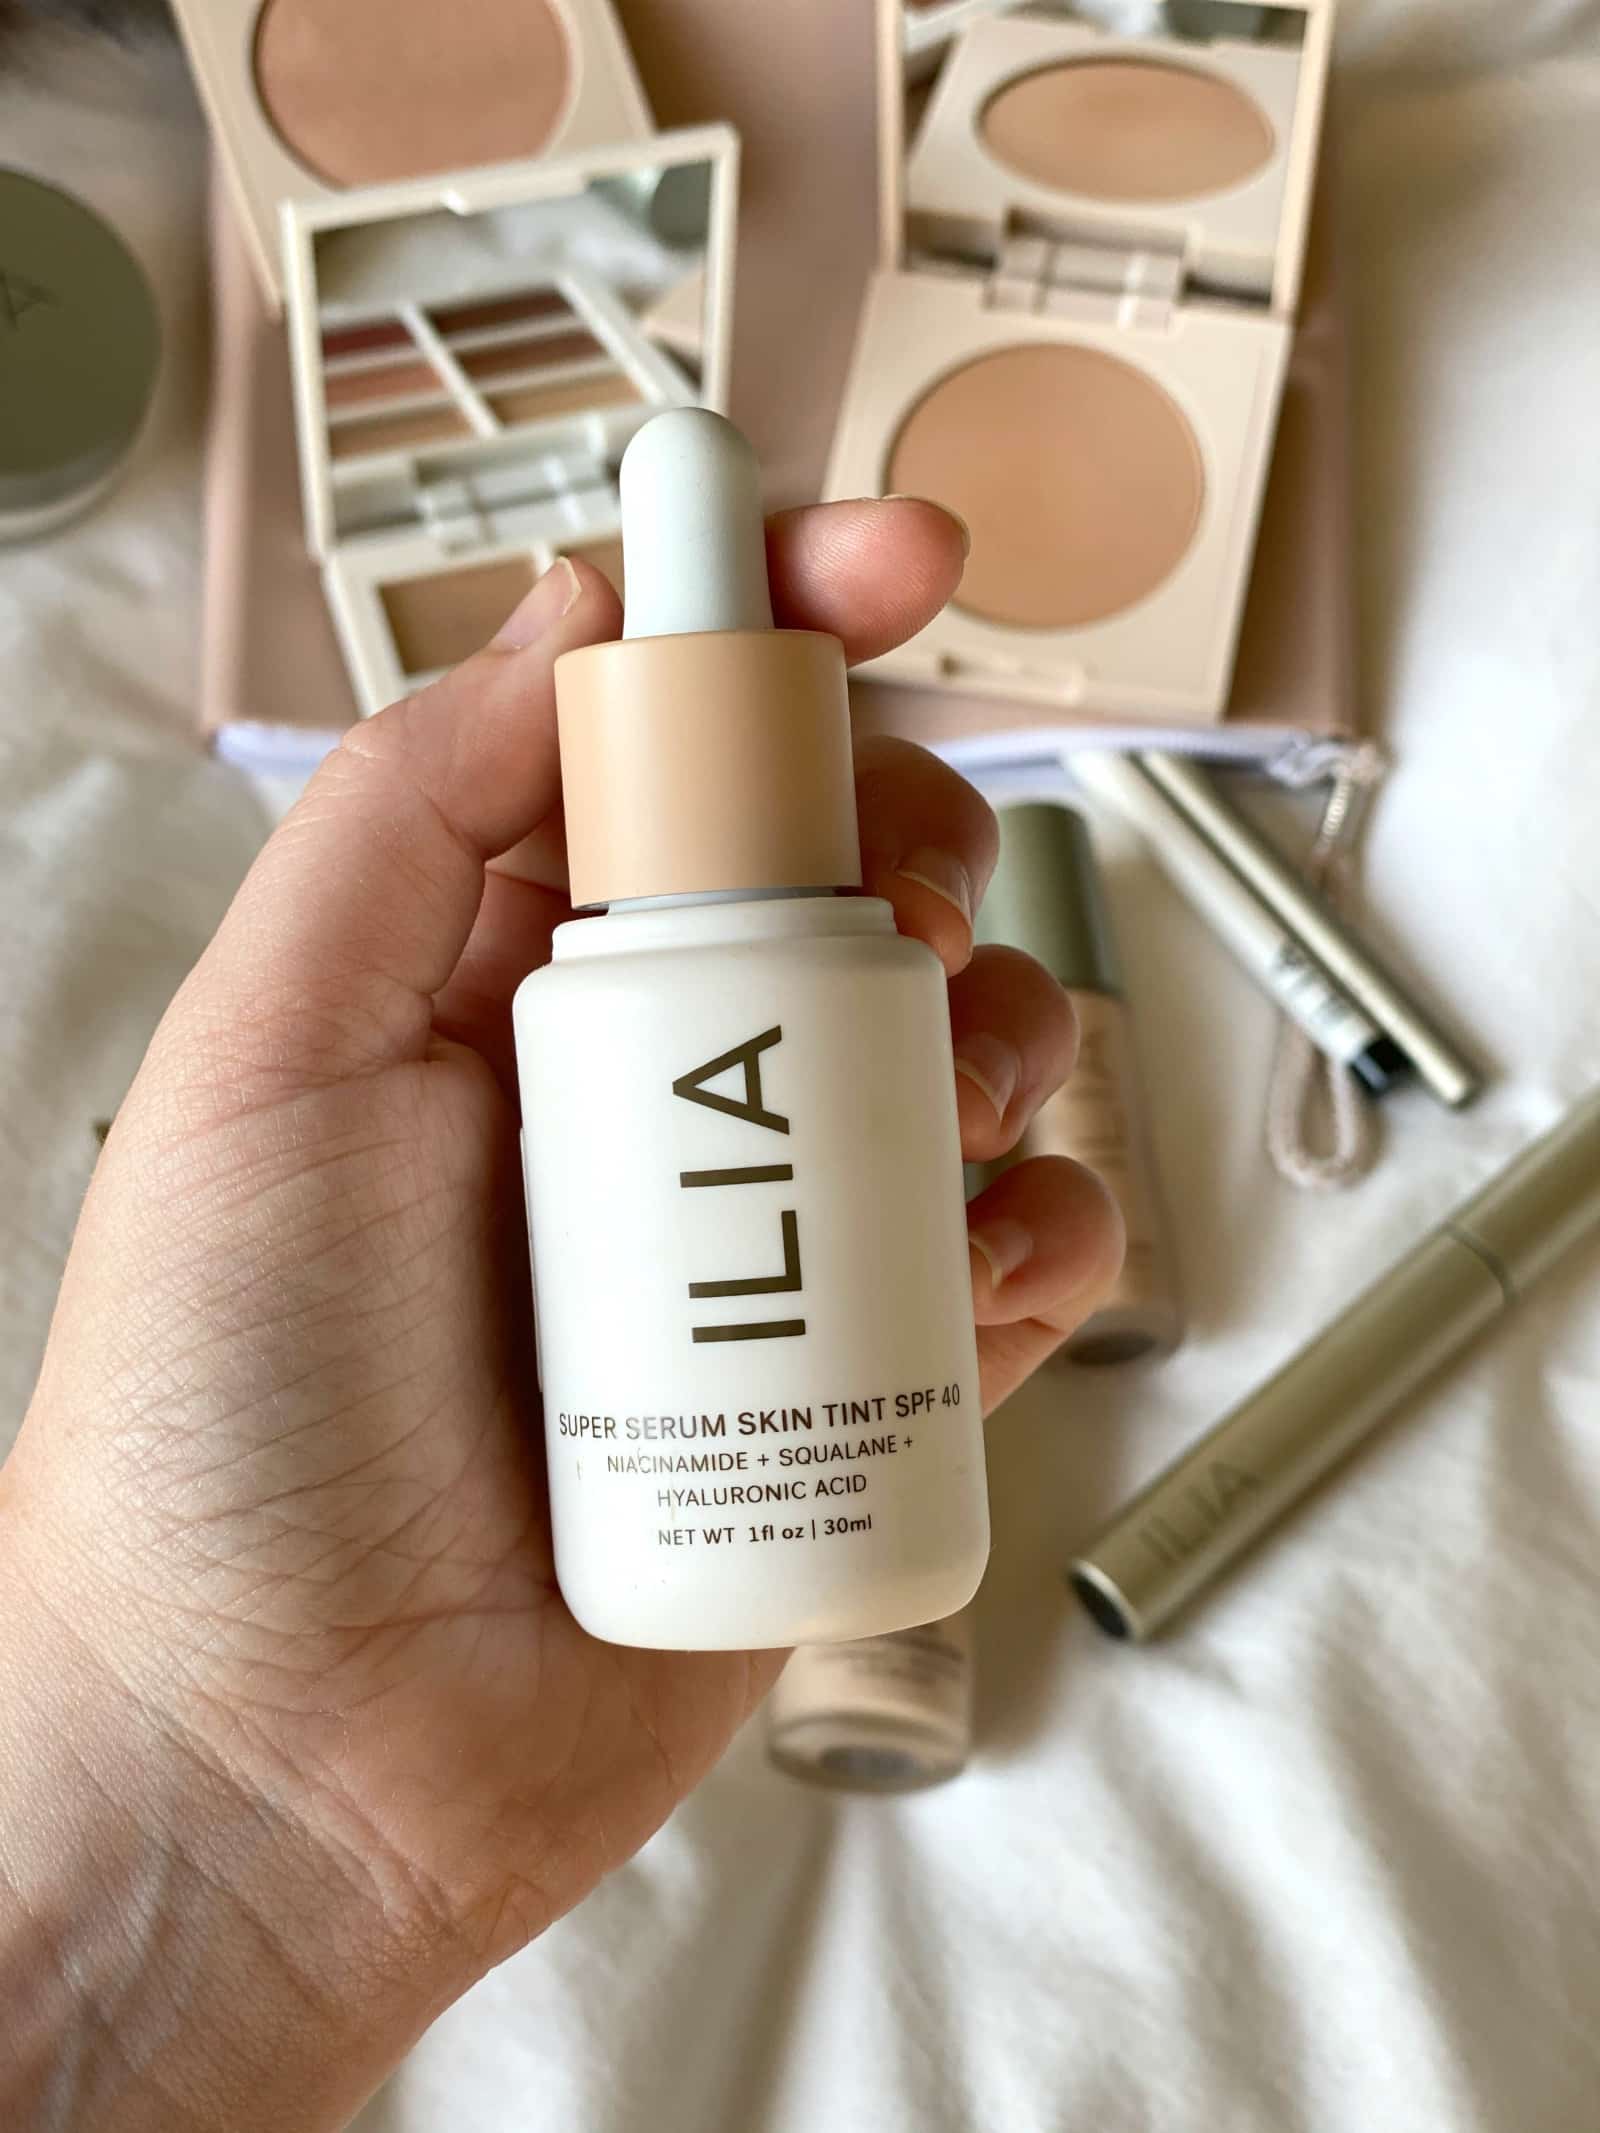 Ilia Beauty Best Products Review